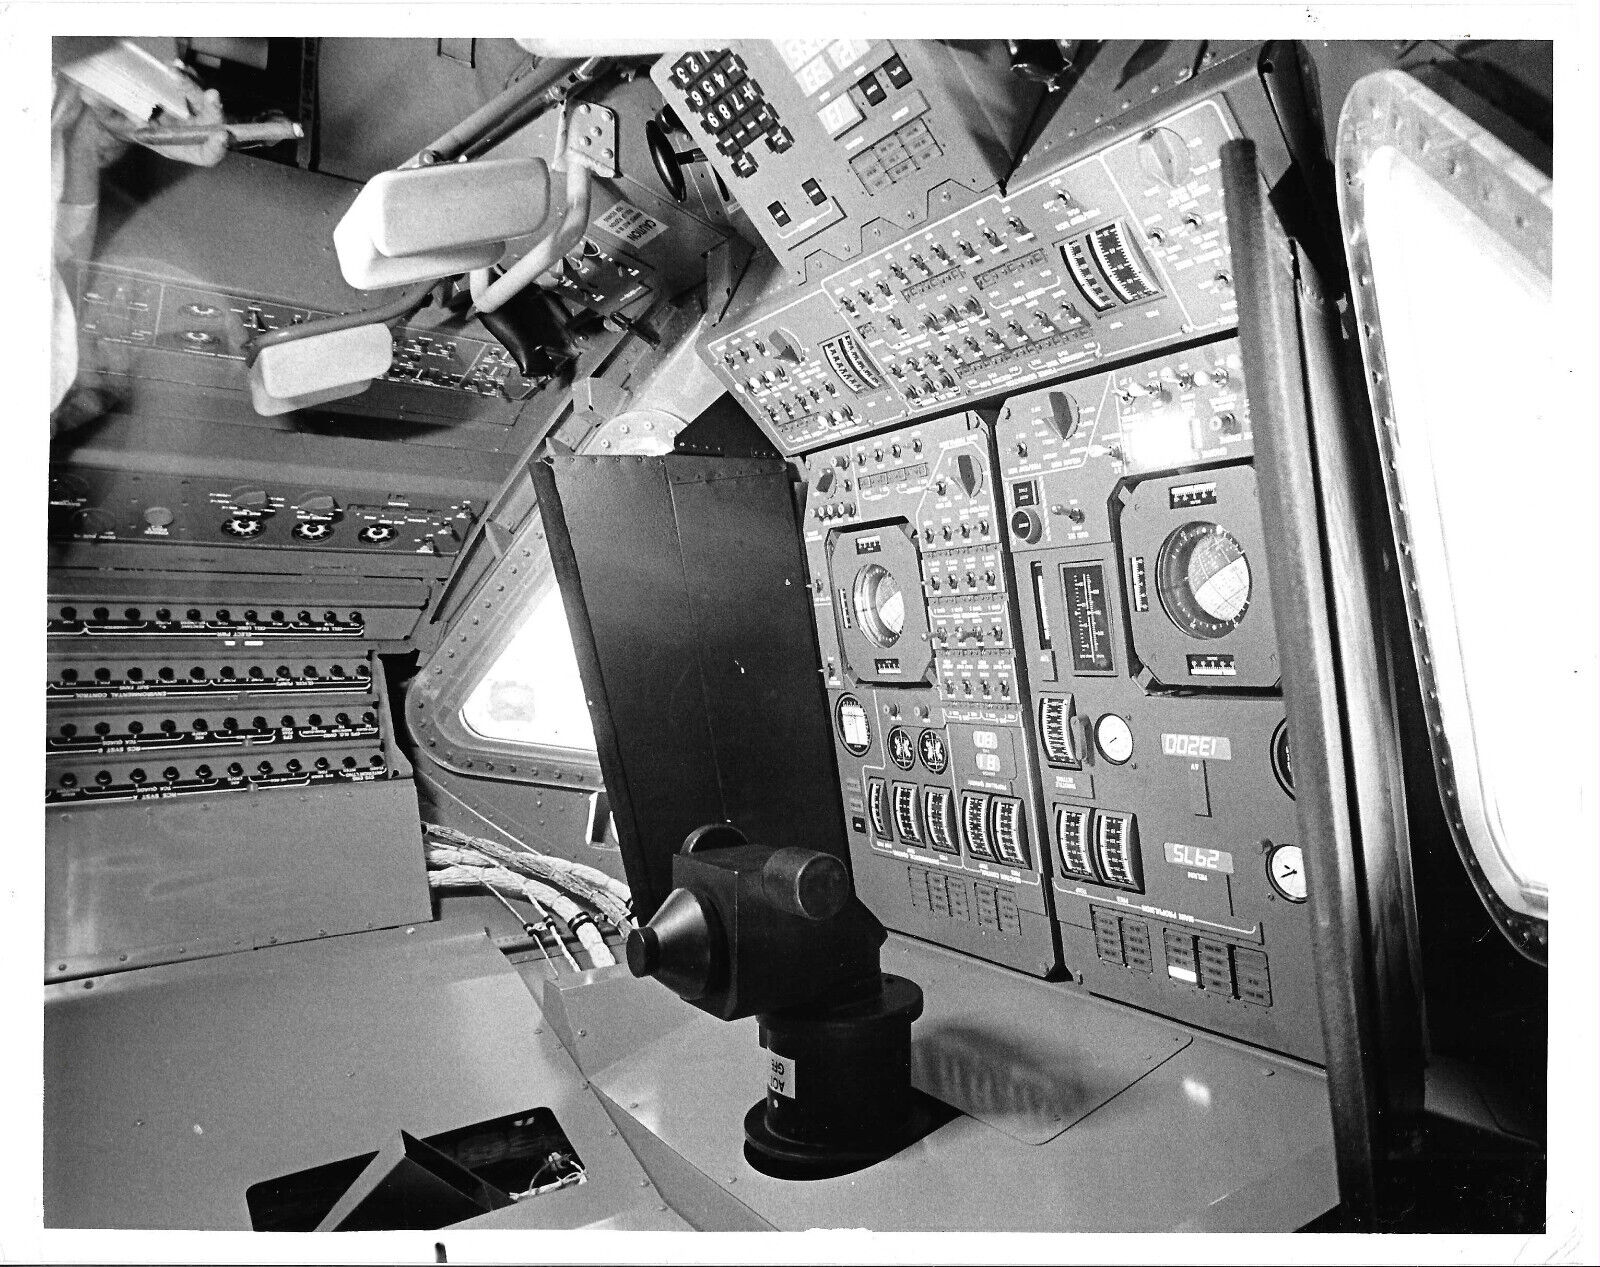 B&W NASA photo showing the interior mock up of the Lunar Module from the 1960s